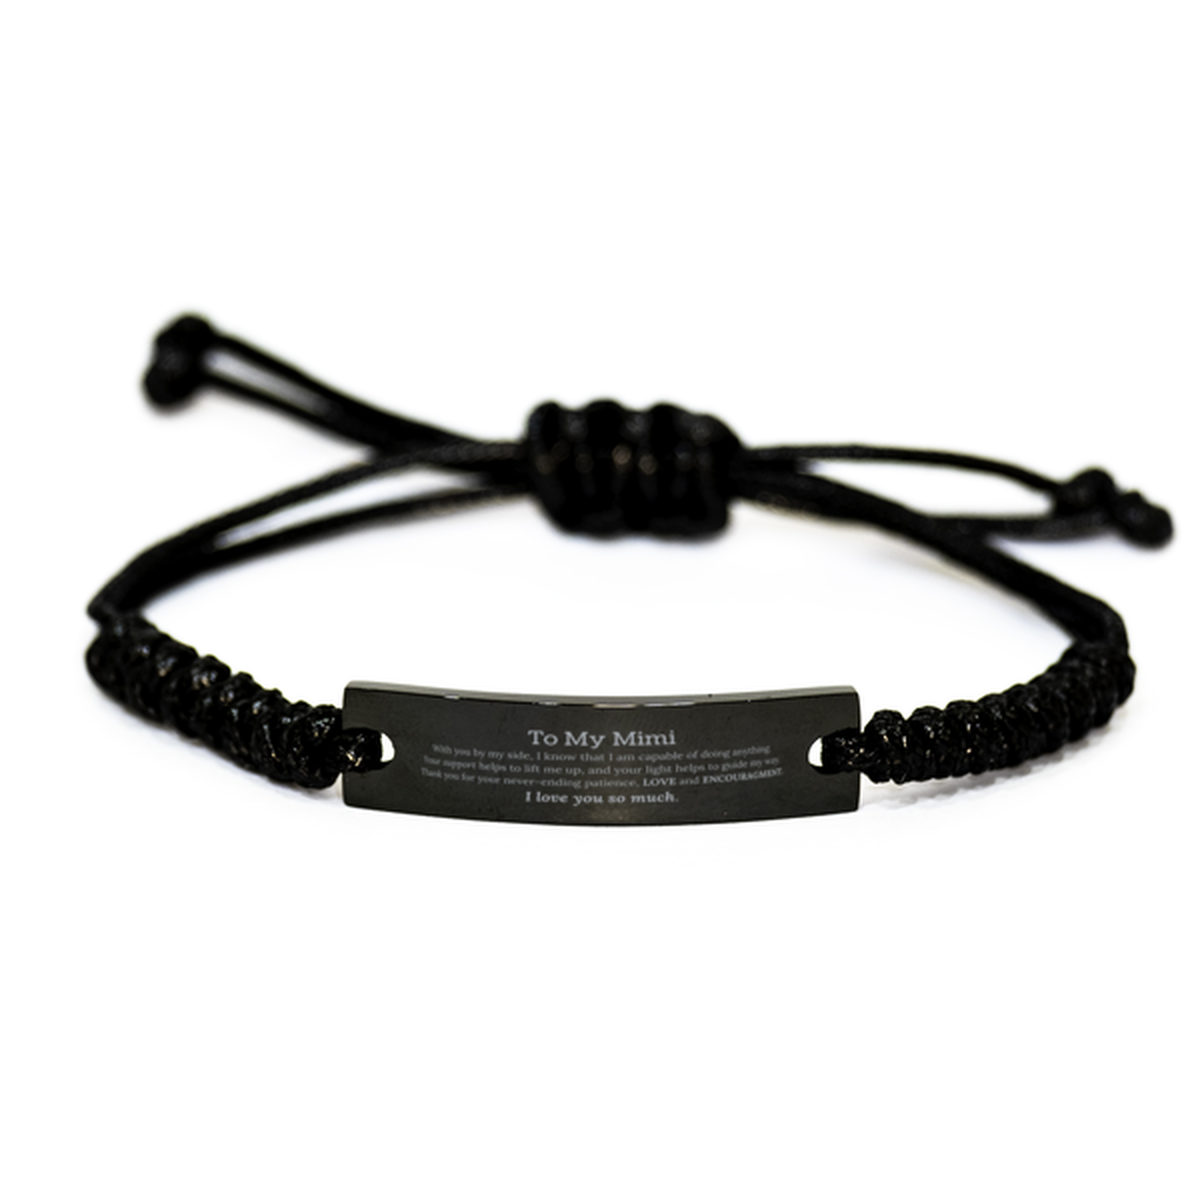 Appreciation Mimi Black Rope Bracelet Gifts, To My Mimi Birthday Christmas Wedding Keepsake Gifts for Mimi With you by my side, I know that I am capable of doing anything. I love you so much